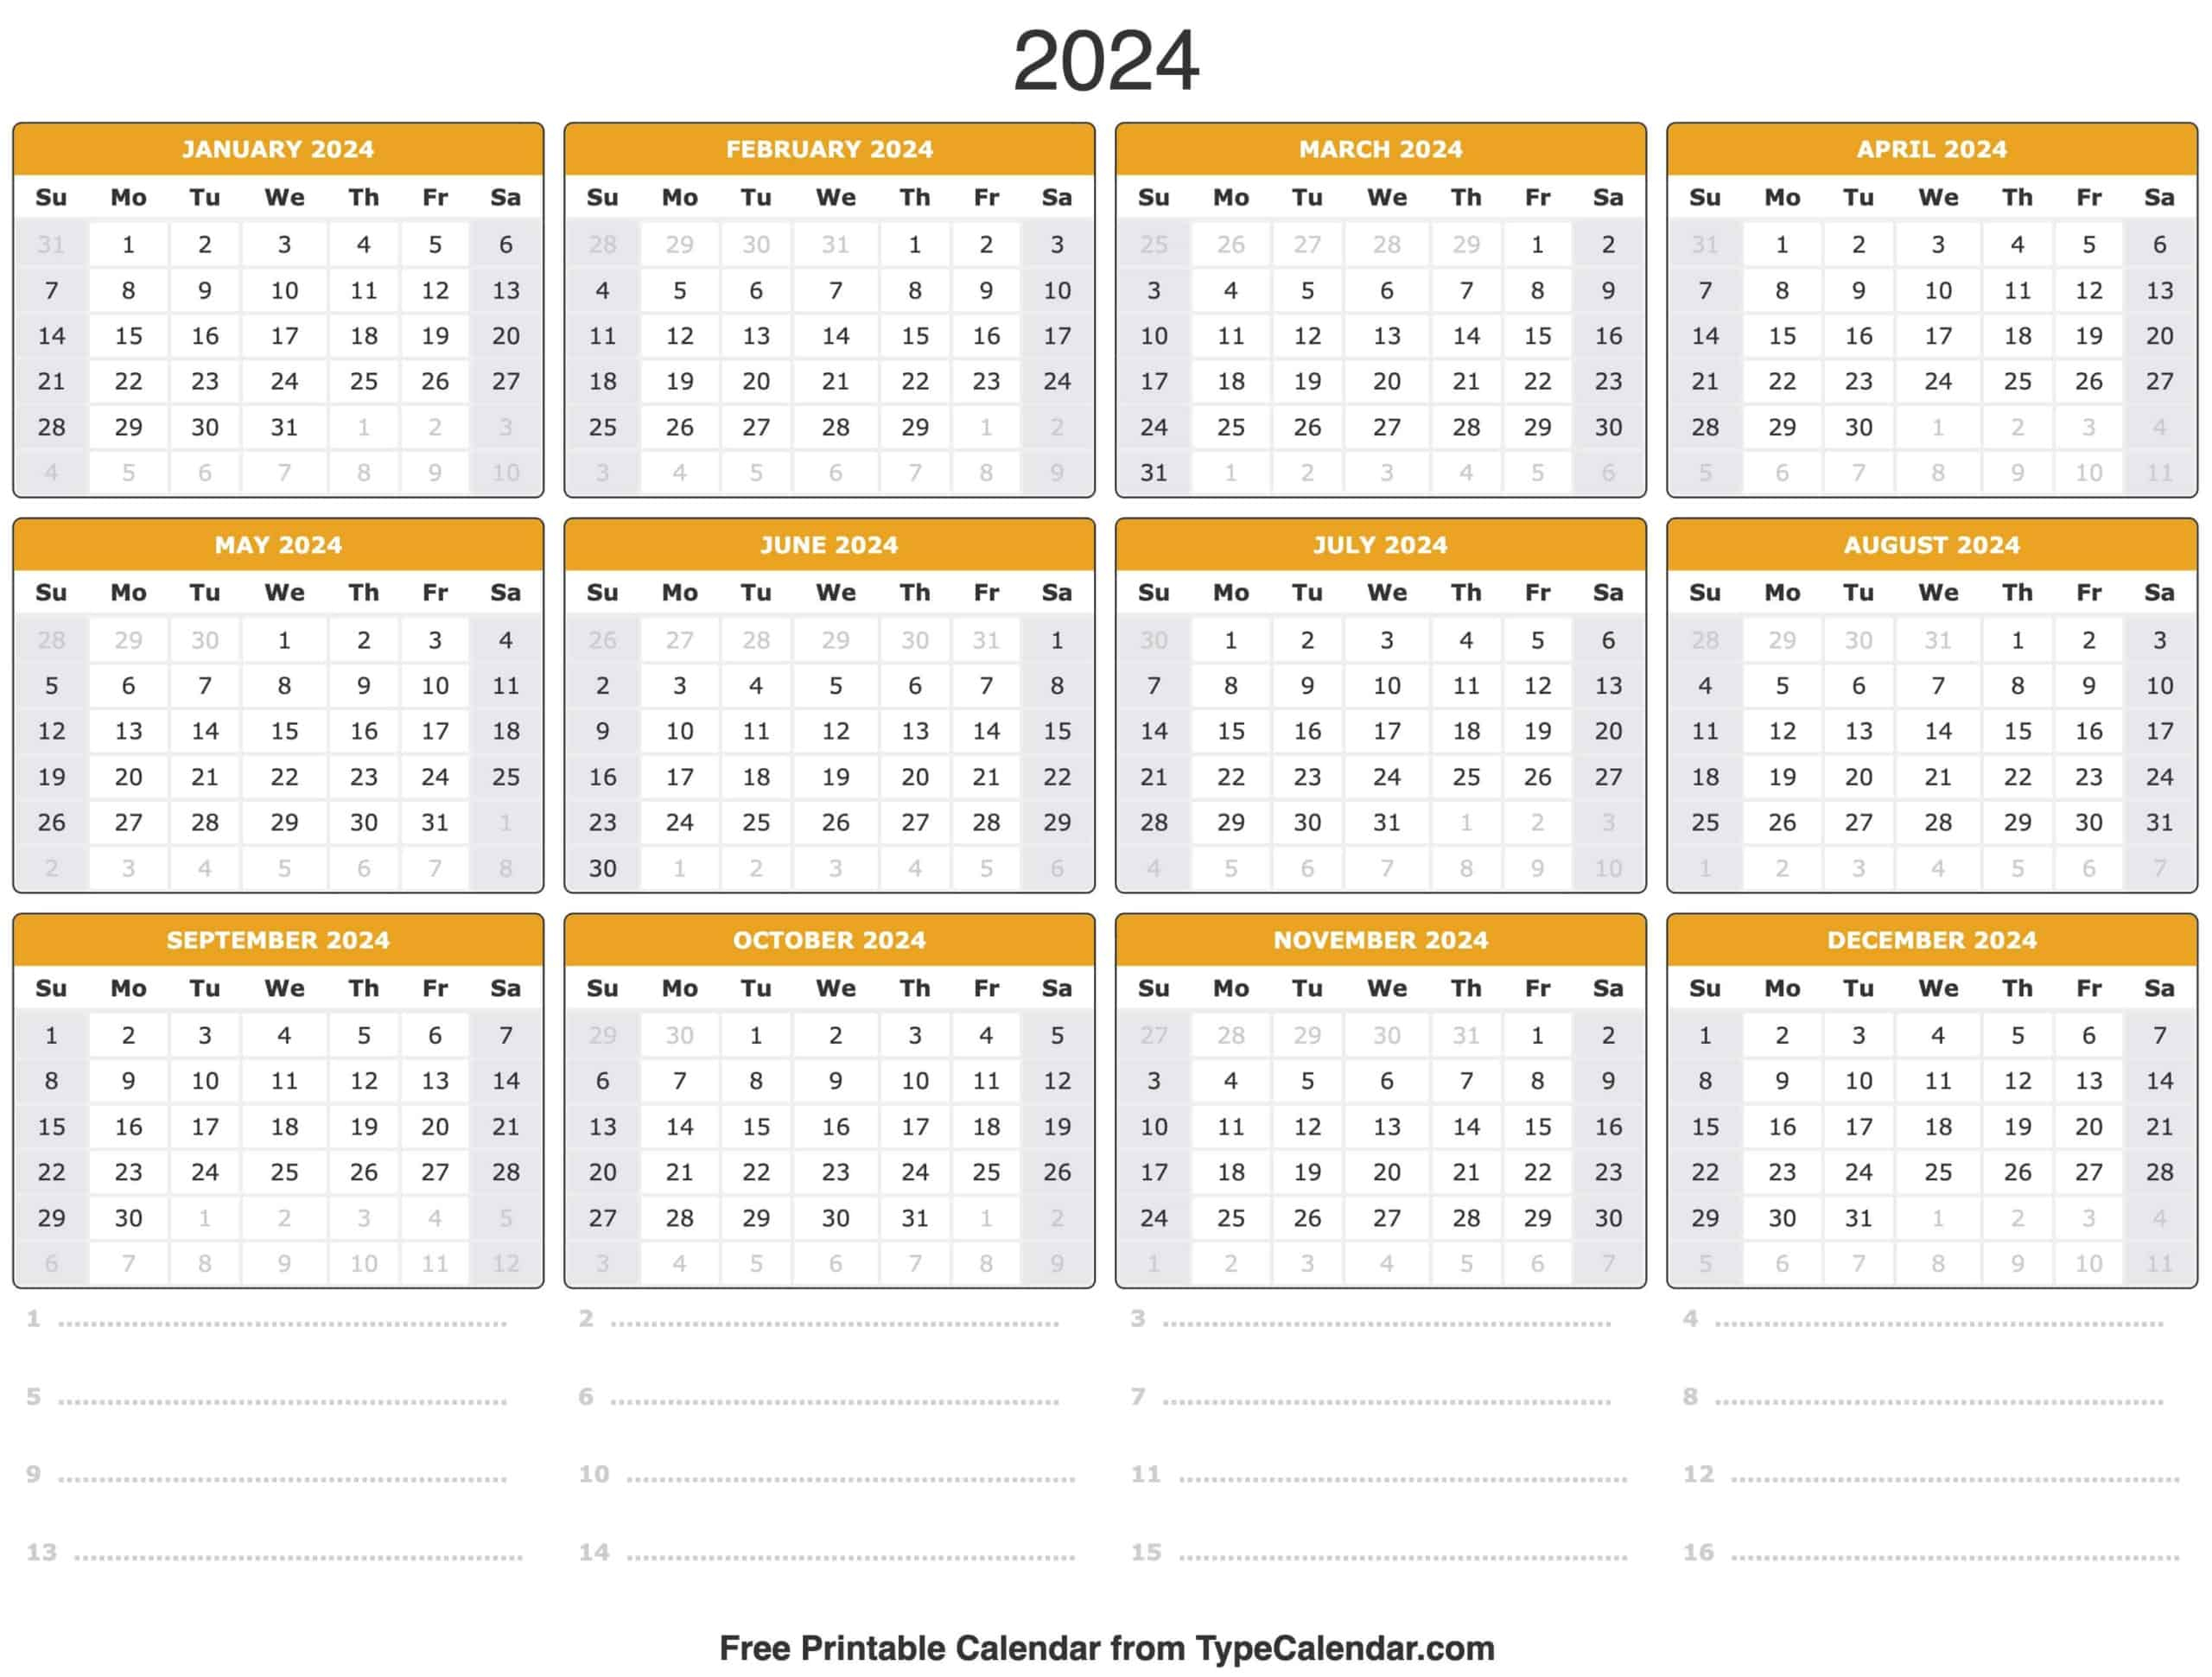 2024 Calendar: Free Printable Calendar With Holidays | Printable 2024 Calendars Without Installing